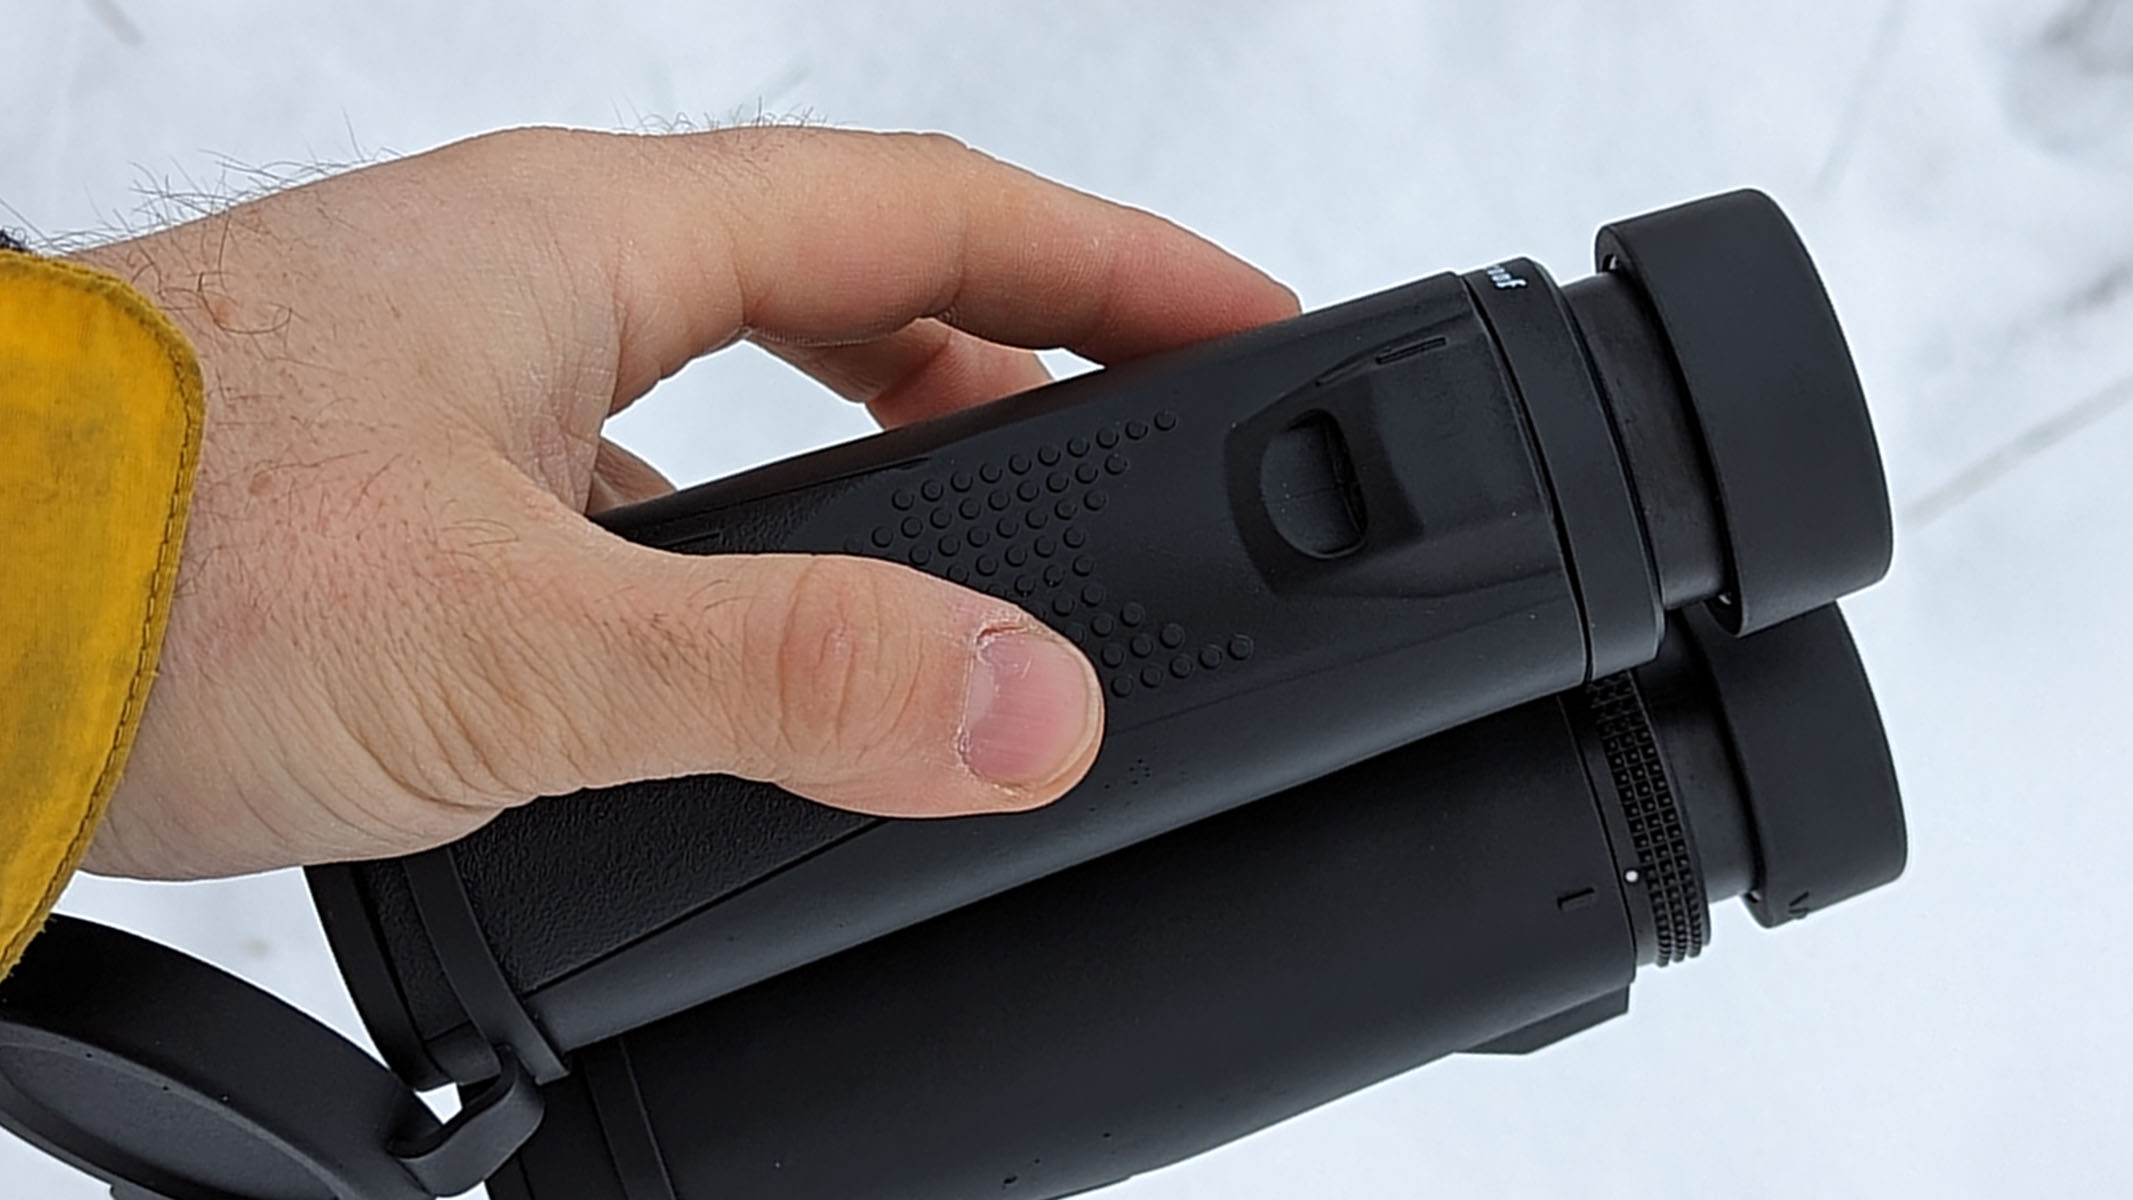 The textured grip on the side of the binoculars can be seen set against a snowy backdrop